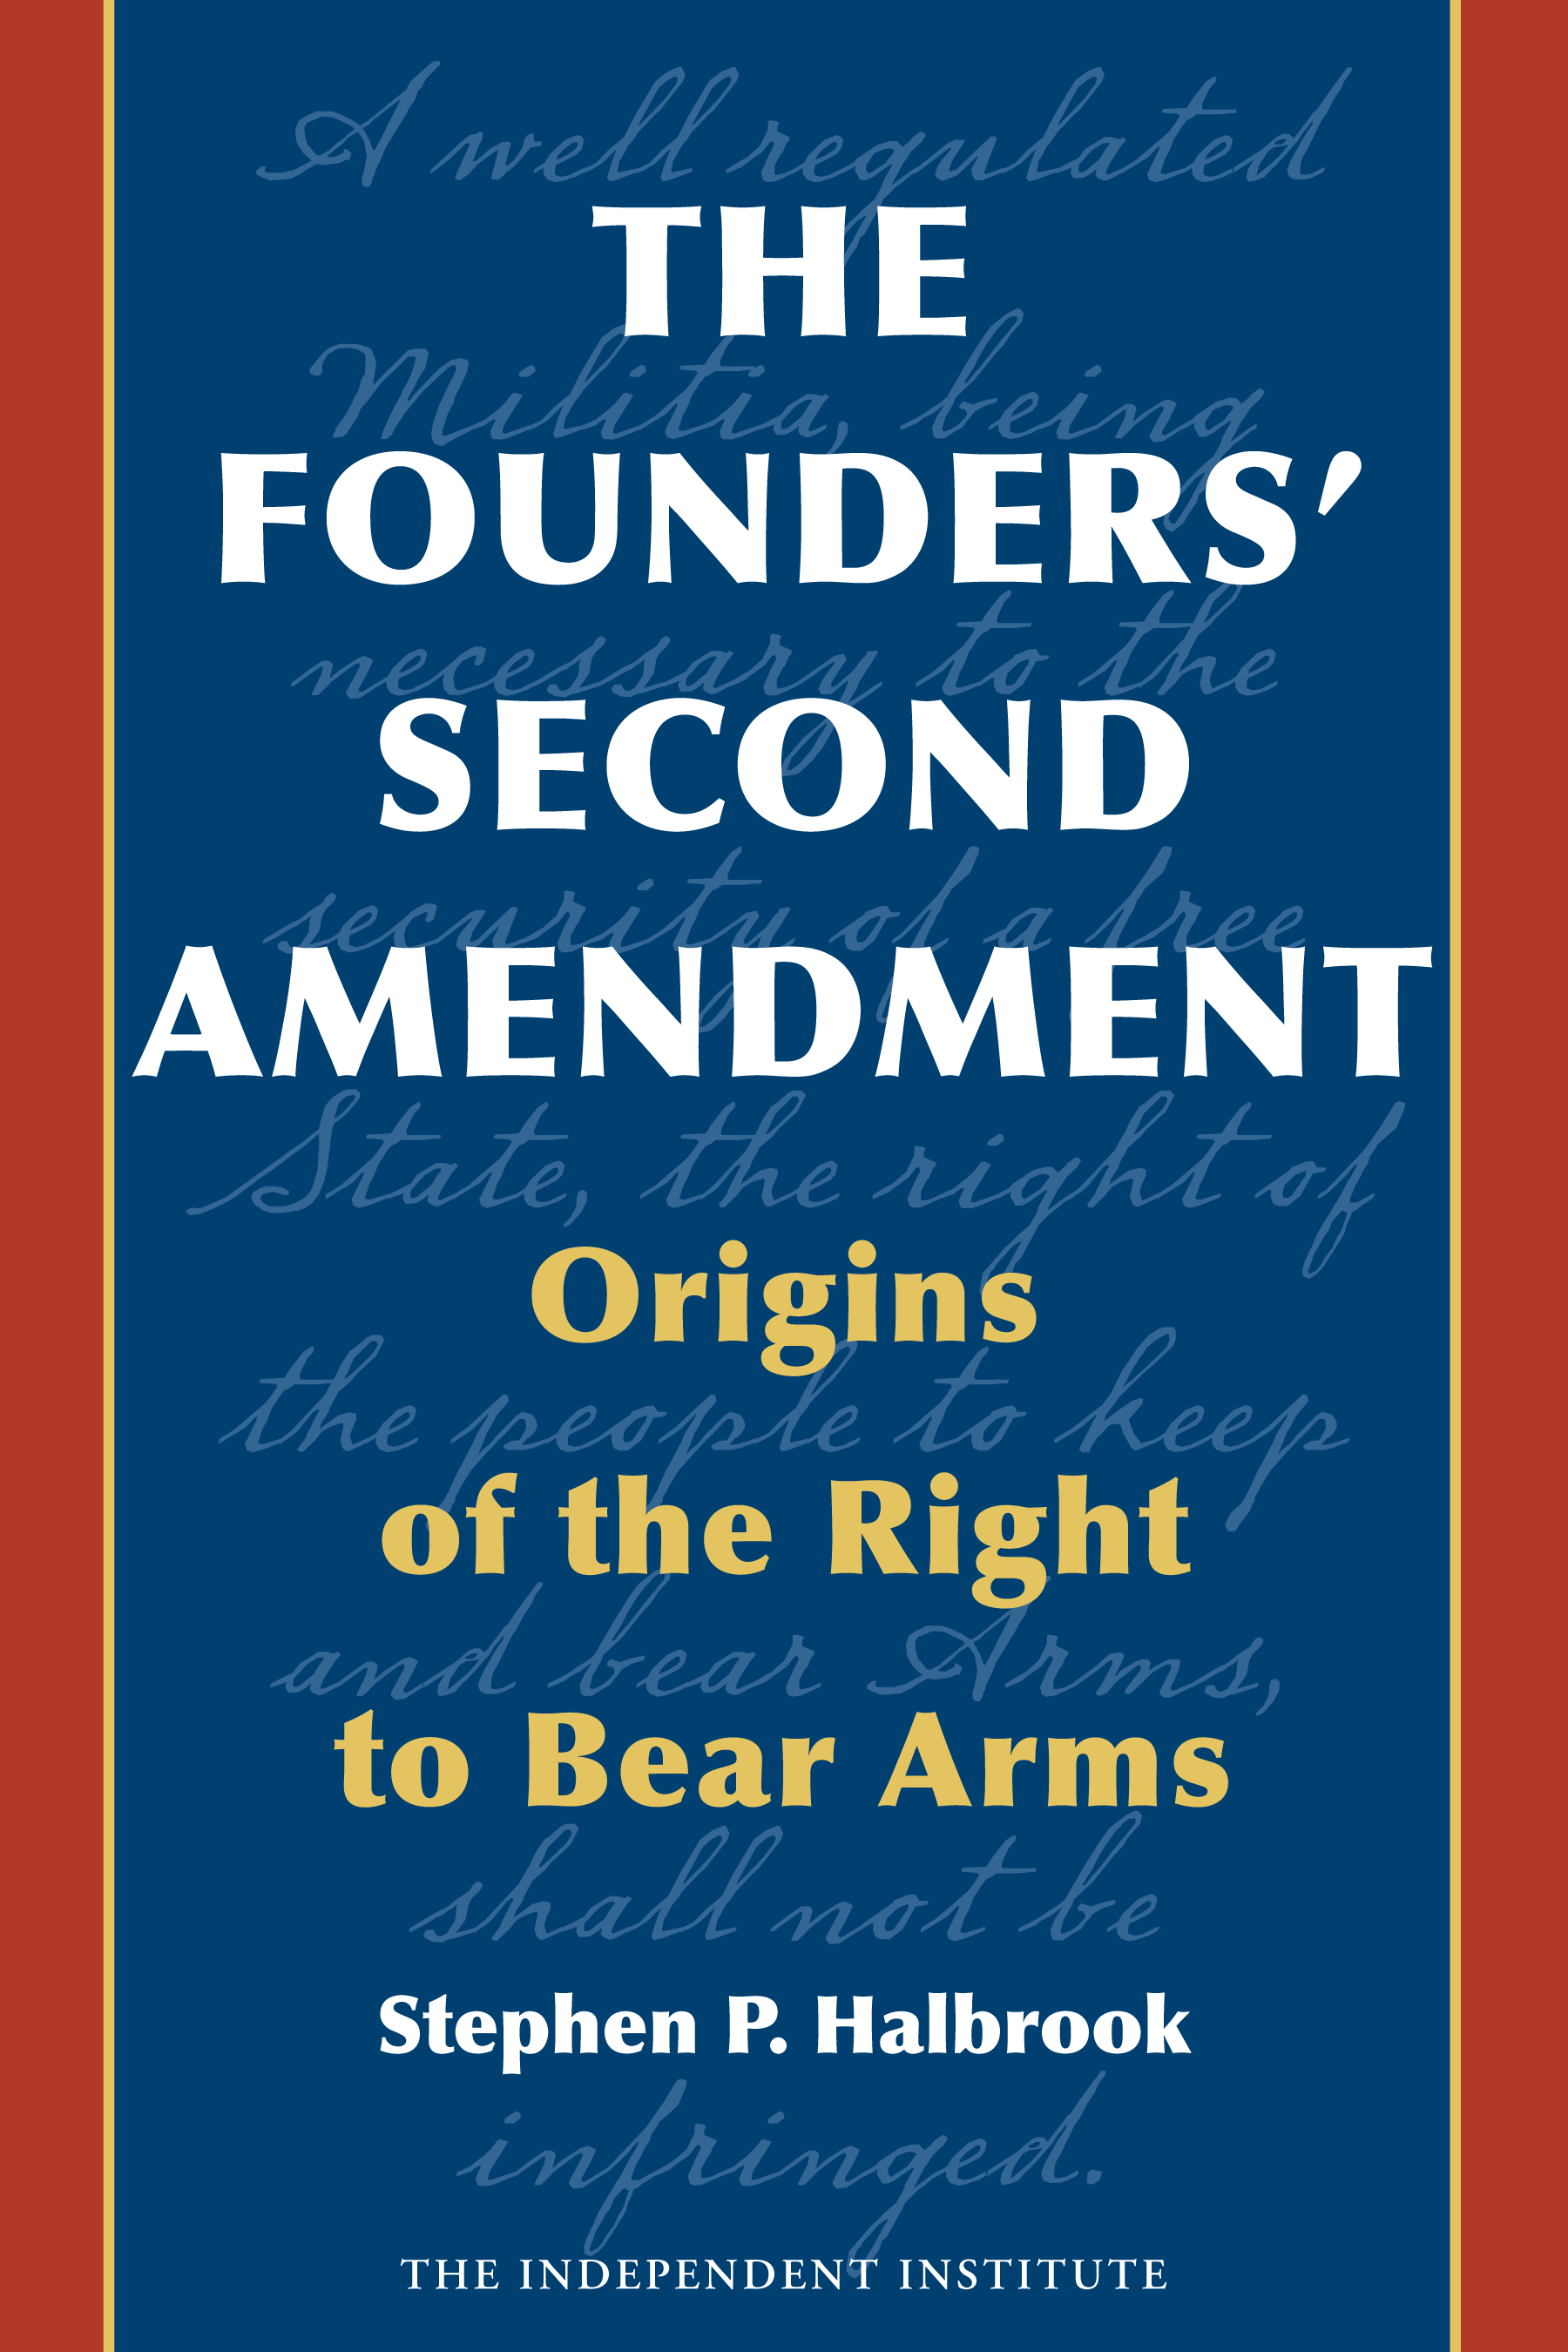 the founders' second amendment: origins of the right to bear arms